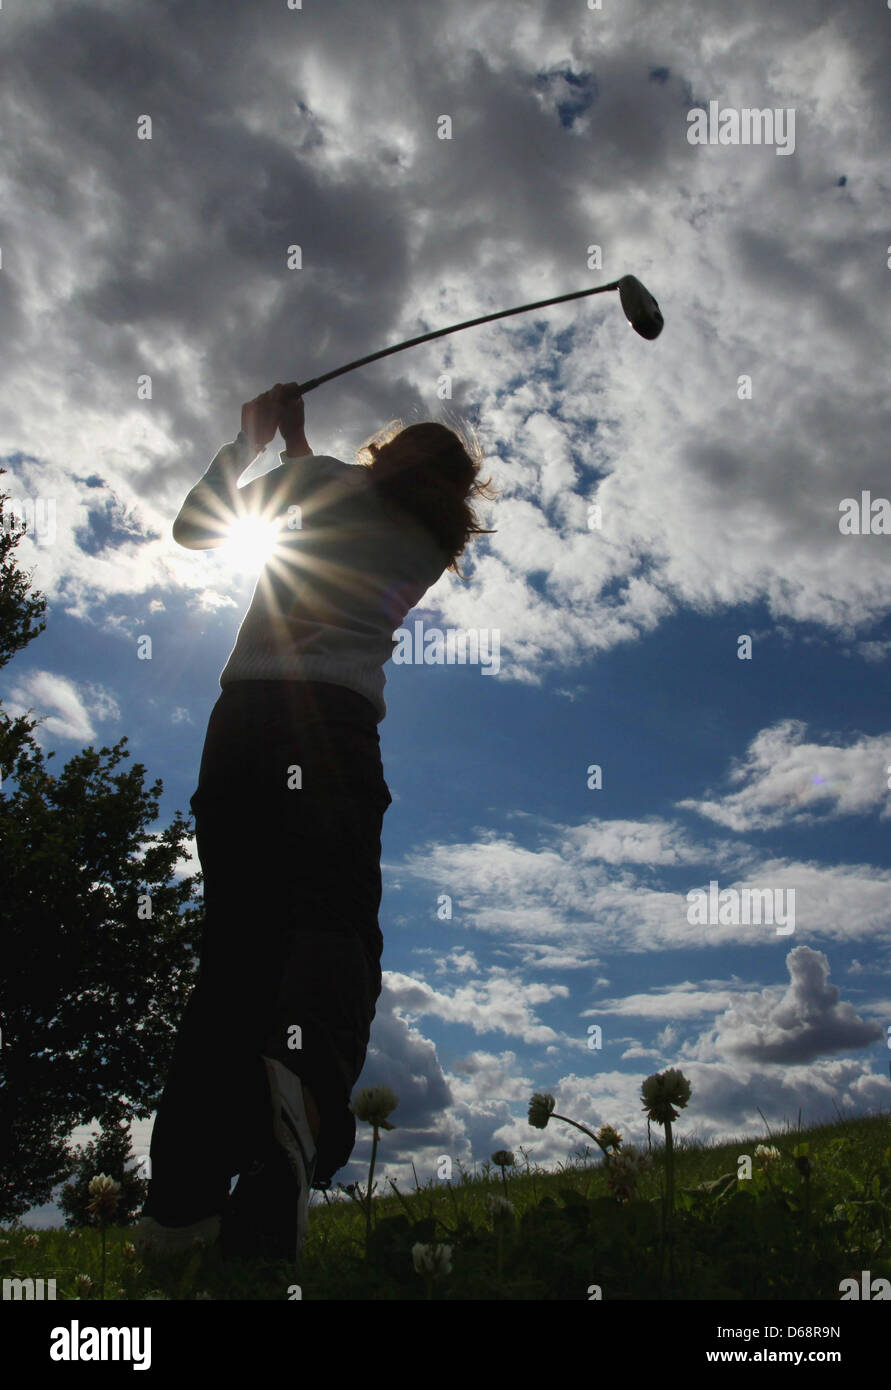 A woman swings her club under rip in the cloud cover at the Fleesensee golf course in Goehren-Lebbin, Germany, 20 July 2012. Photo: Heiko Lossie Stock Photo